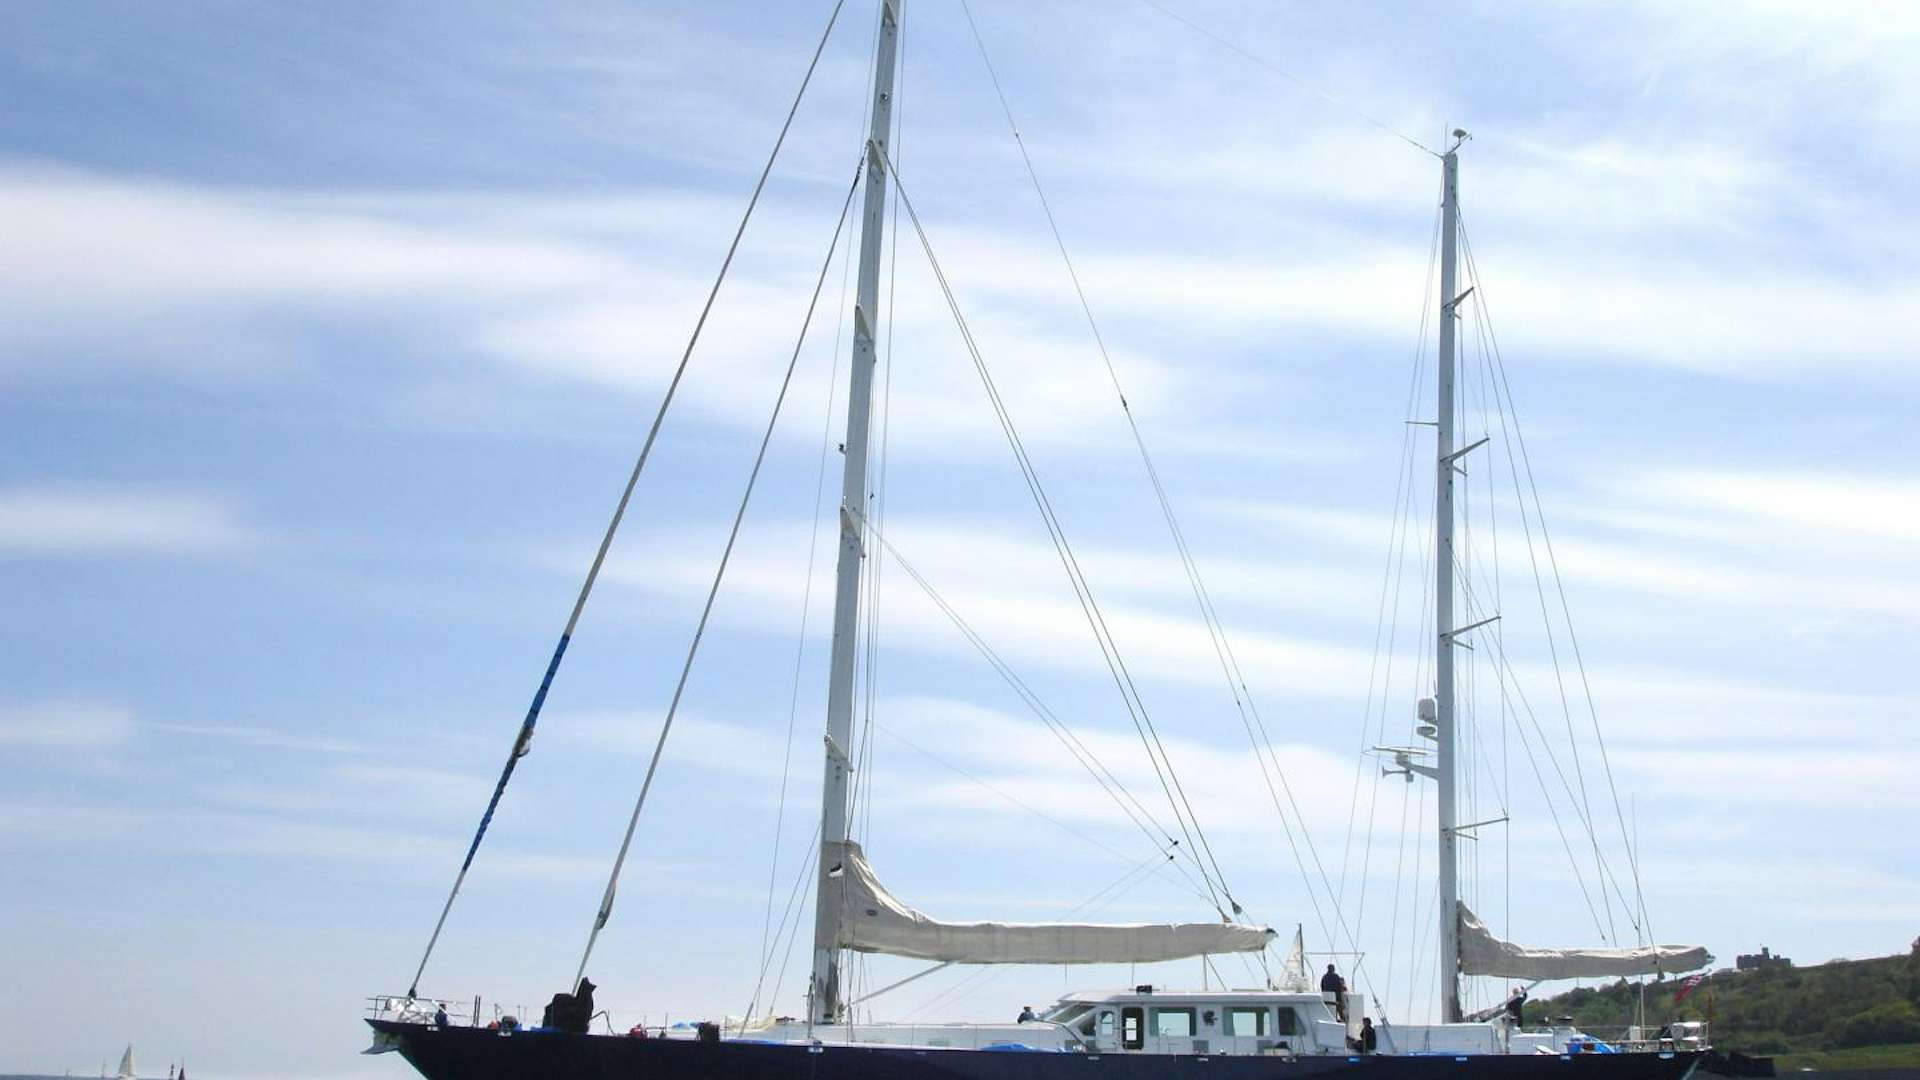 Watch Video for MARLIN DELREY V Yacht for Sale